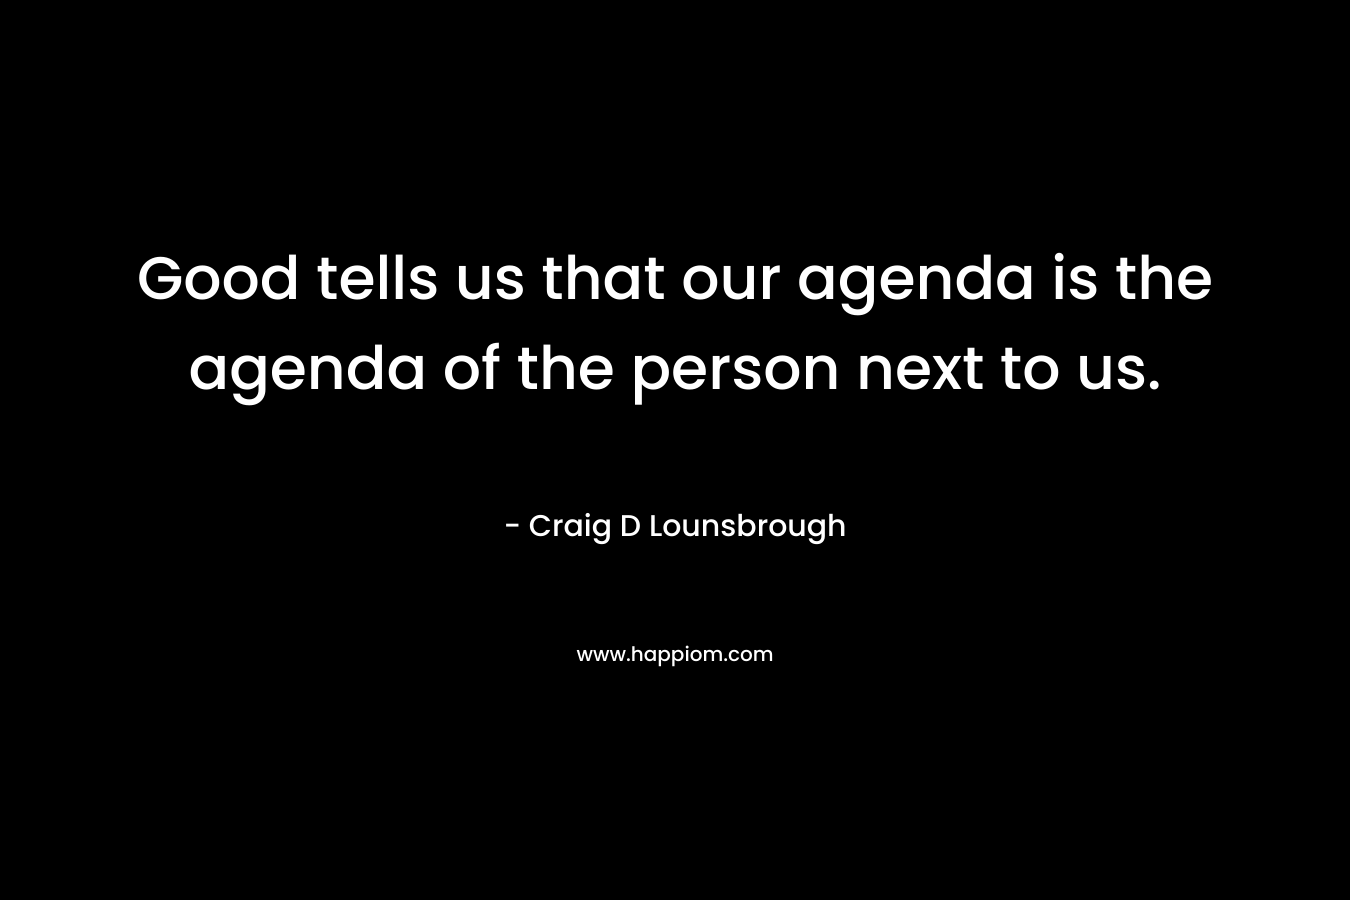 Good tells us that our agenda is the agenda of the person next to us.